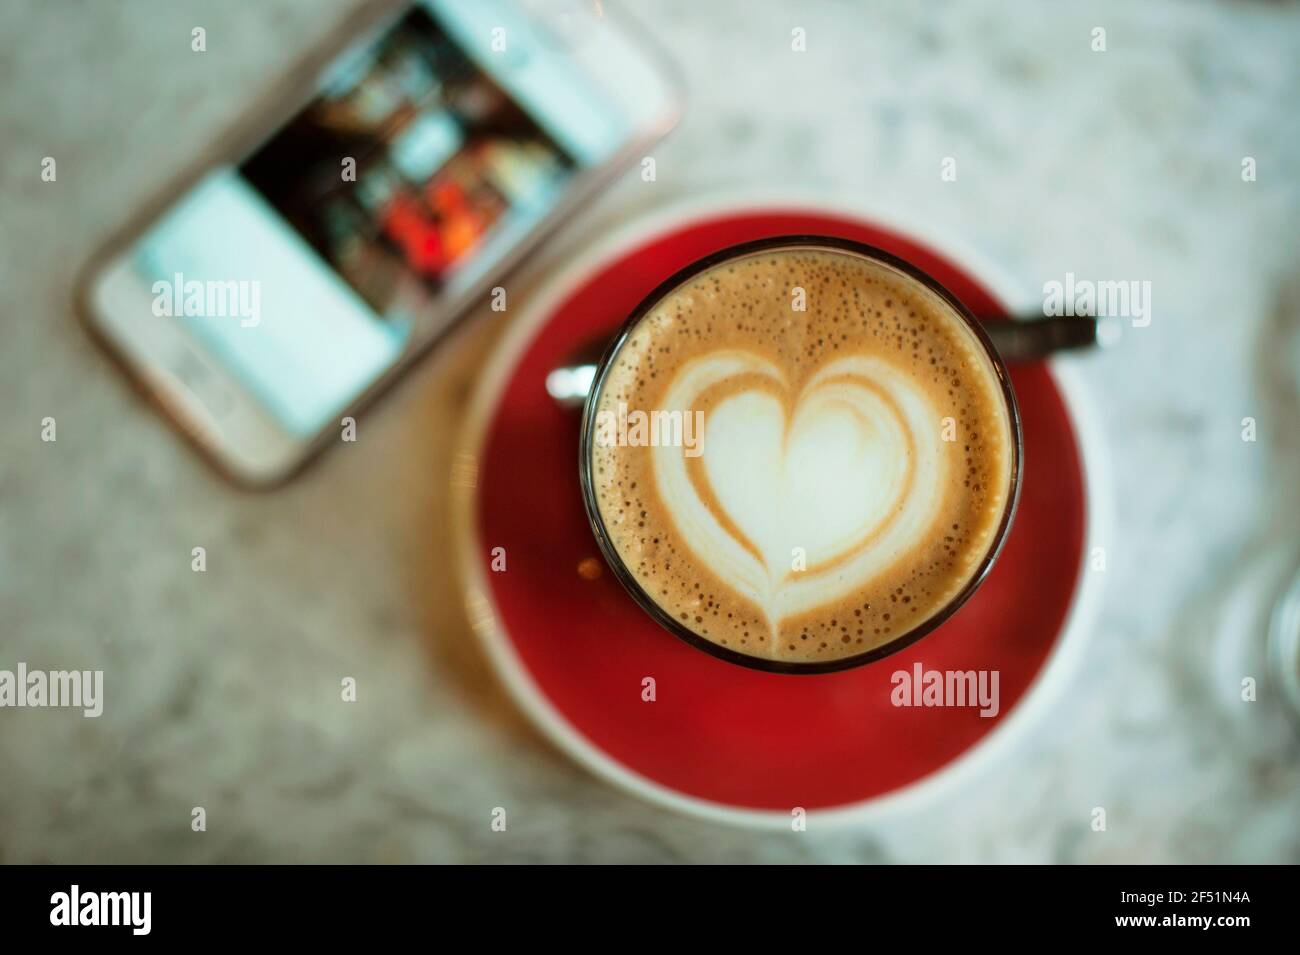 Close-up of coffee cup from above with a heart shape in froth and a smartphone on marble tabletop. Love coffee / coffee break concept Stock Photo